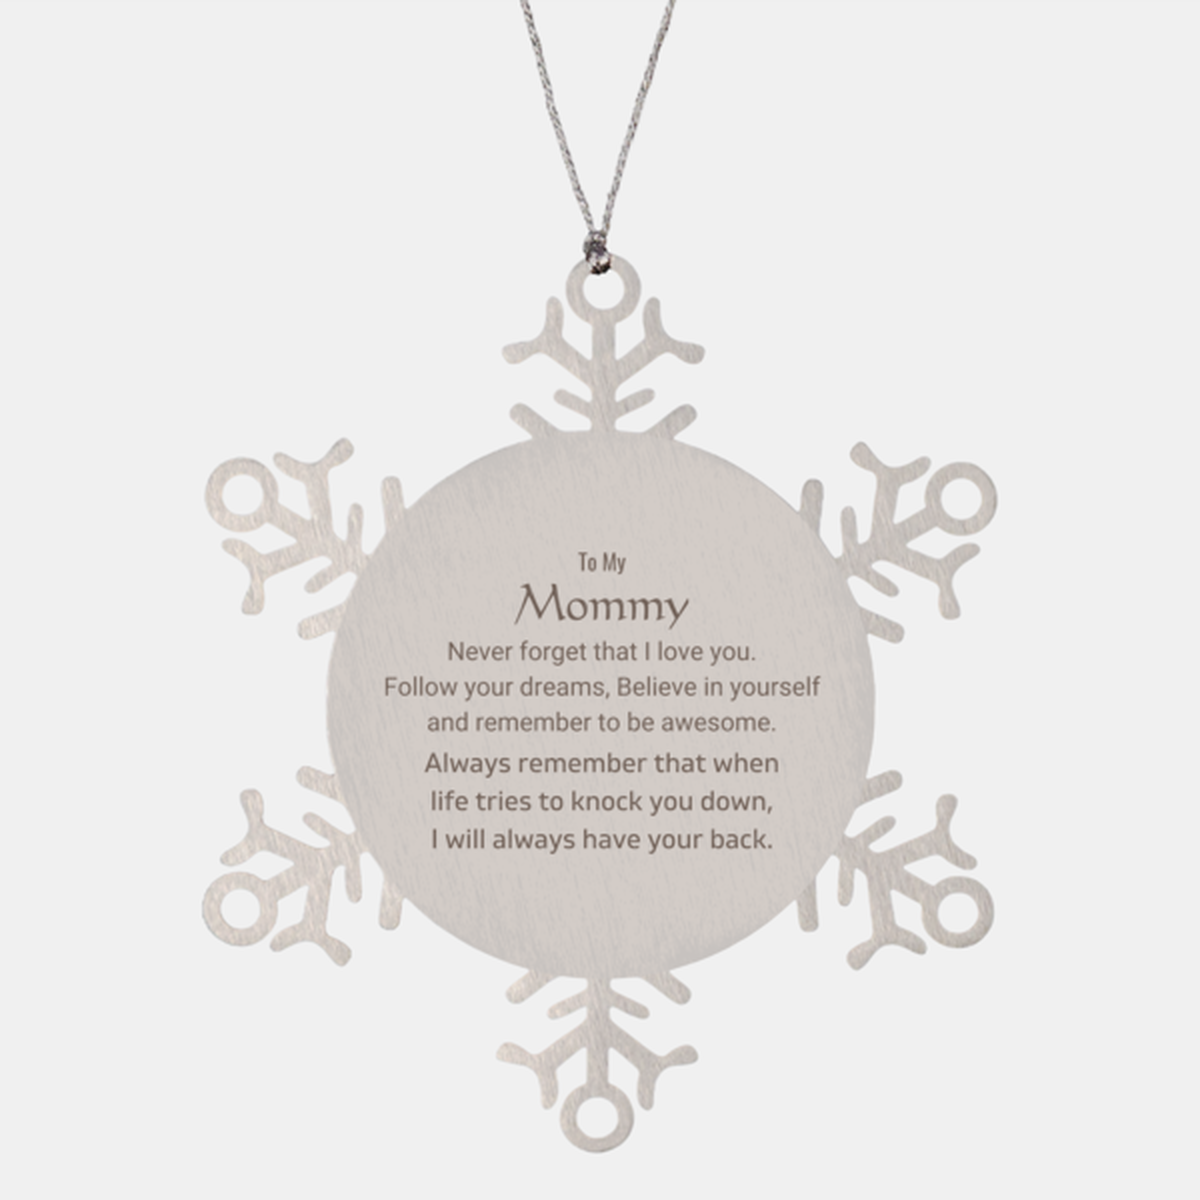 Inspirational Gifts for Mommy, Follow your dreams, Believe in yourself, Mommy Snowflake Ornament, Birthday Christmas Unique Gifts For Mommy